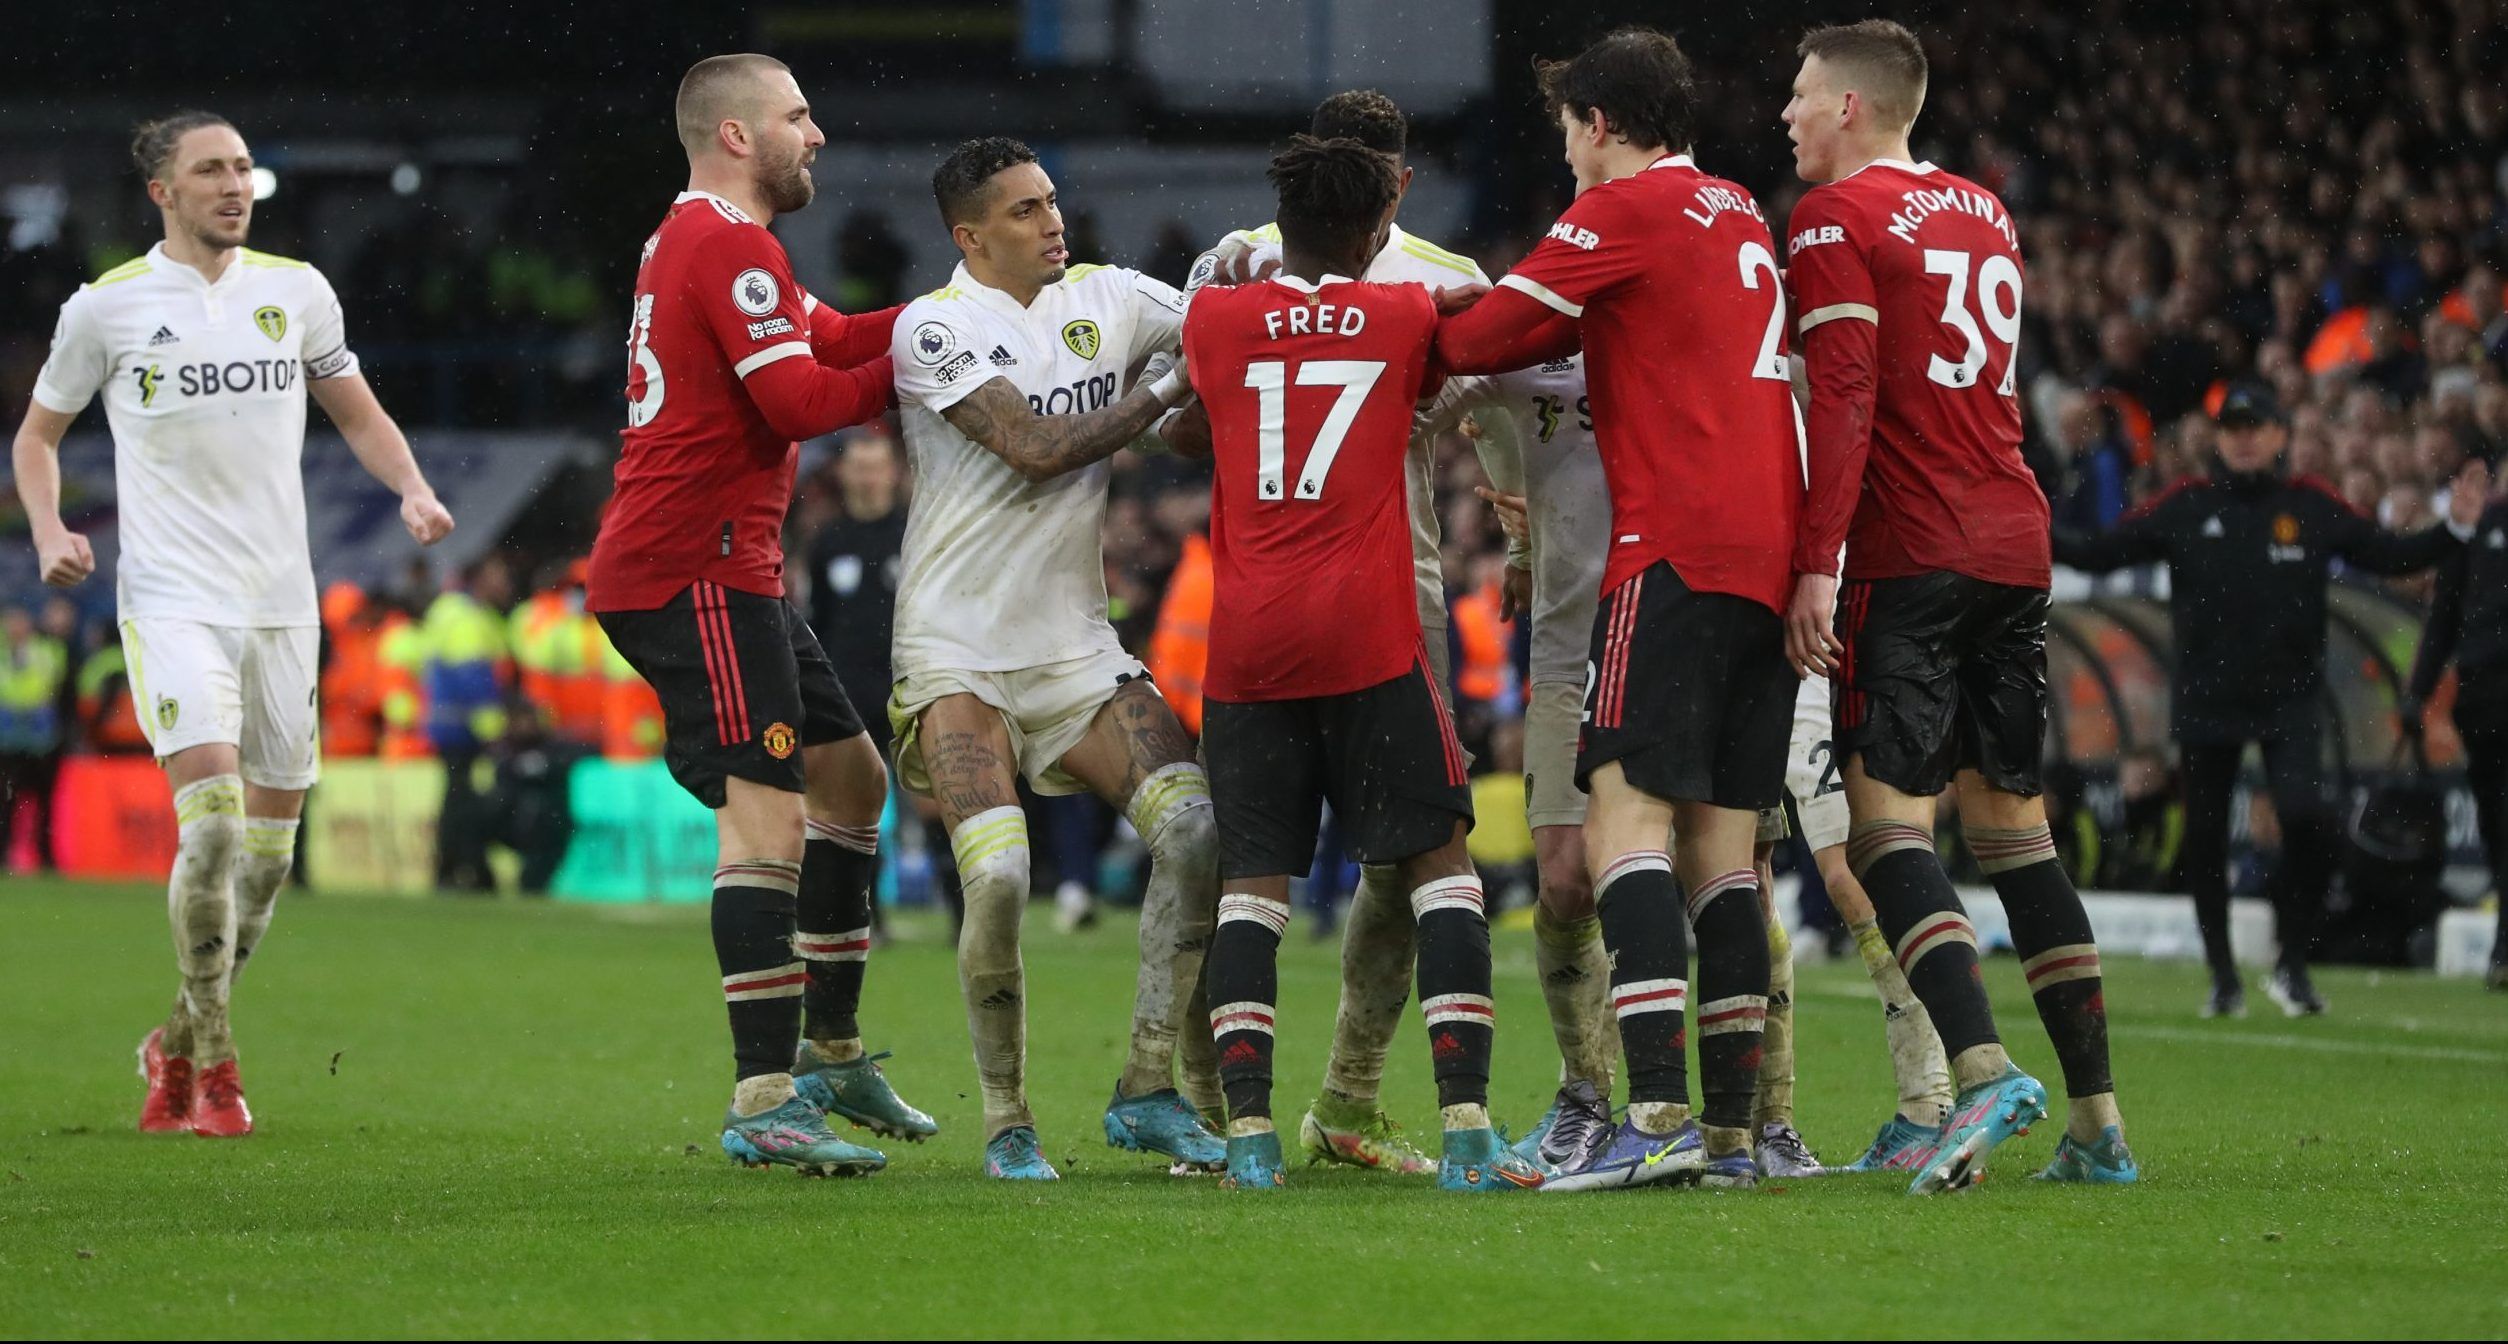 Manchester United's Fred and Victor Lindelof clash with Leeds United's Junior Firpo and Raphinha